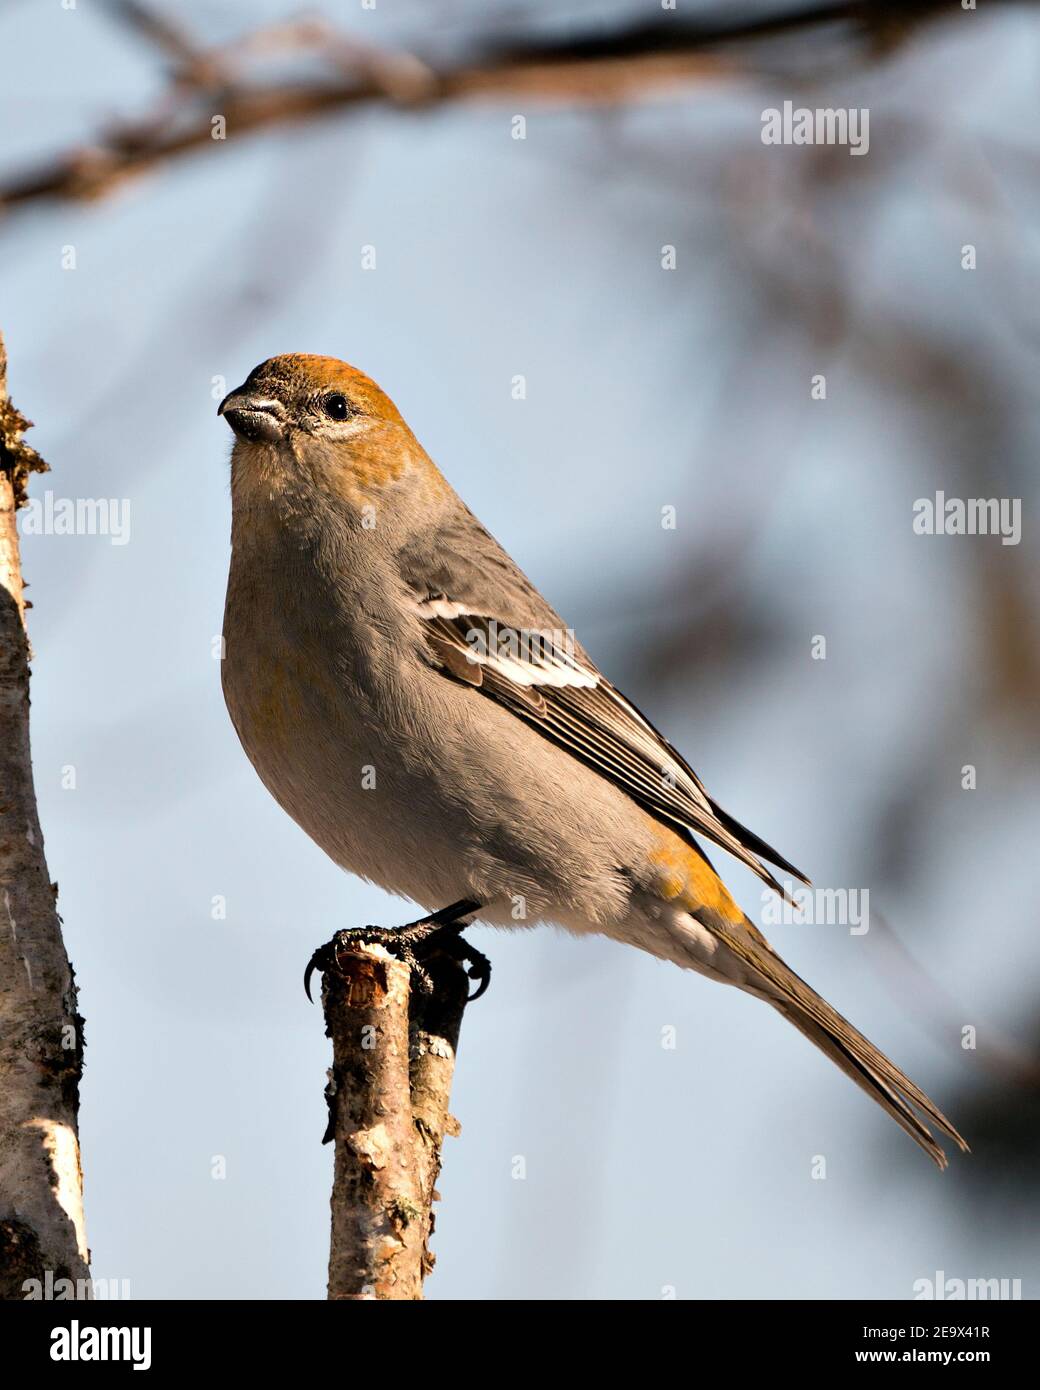 Pine Grosbeak close-up profile view, perched  with a blur background in its environment. Image. Picture. Portrait. Pine Grosbeak Stock Photos. Stock Photo